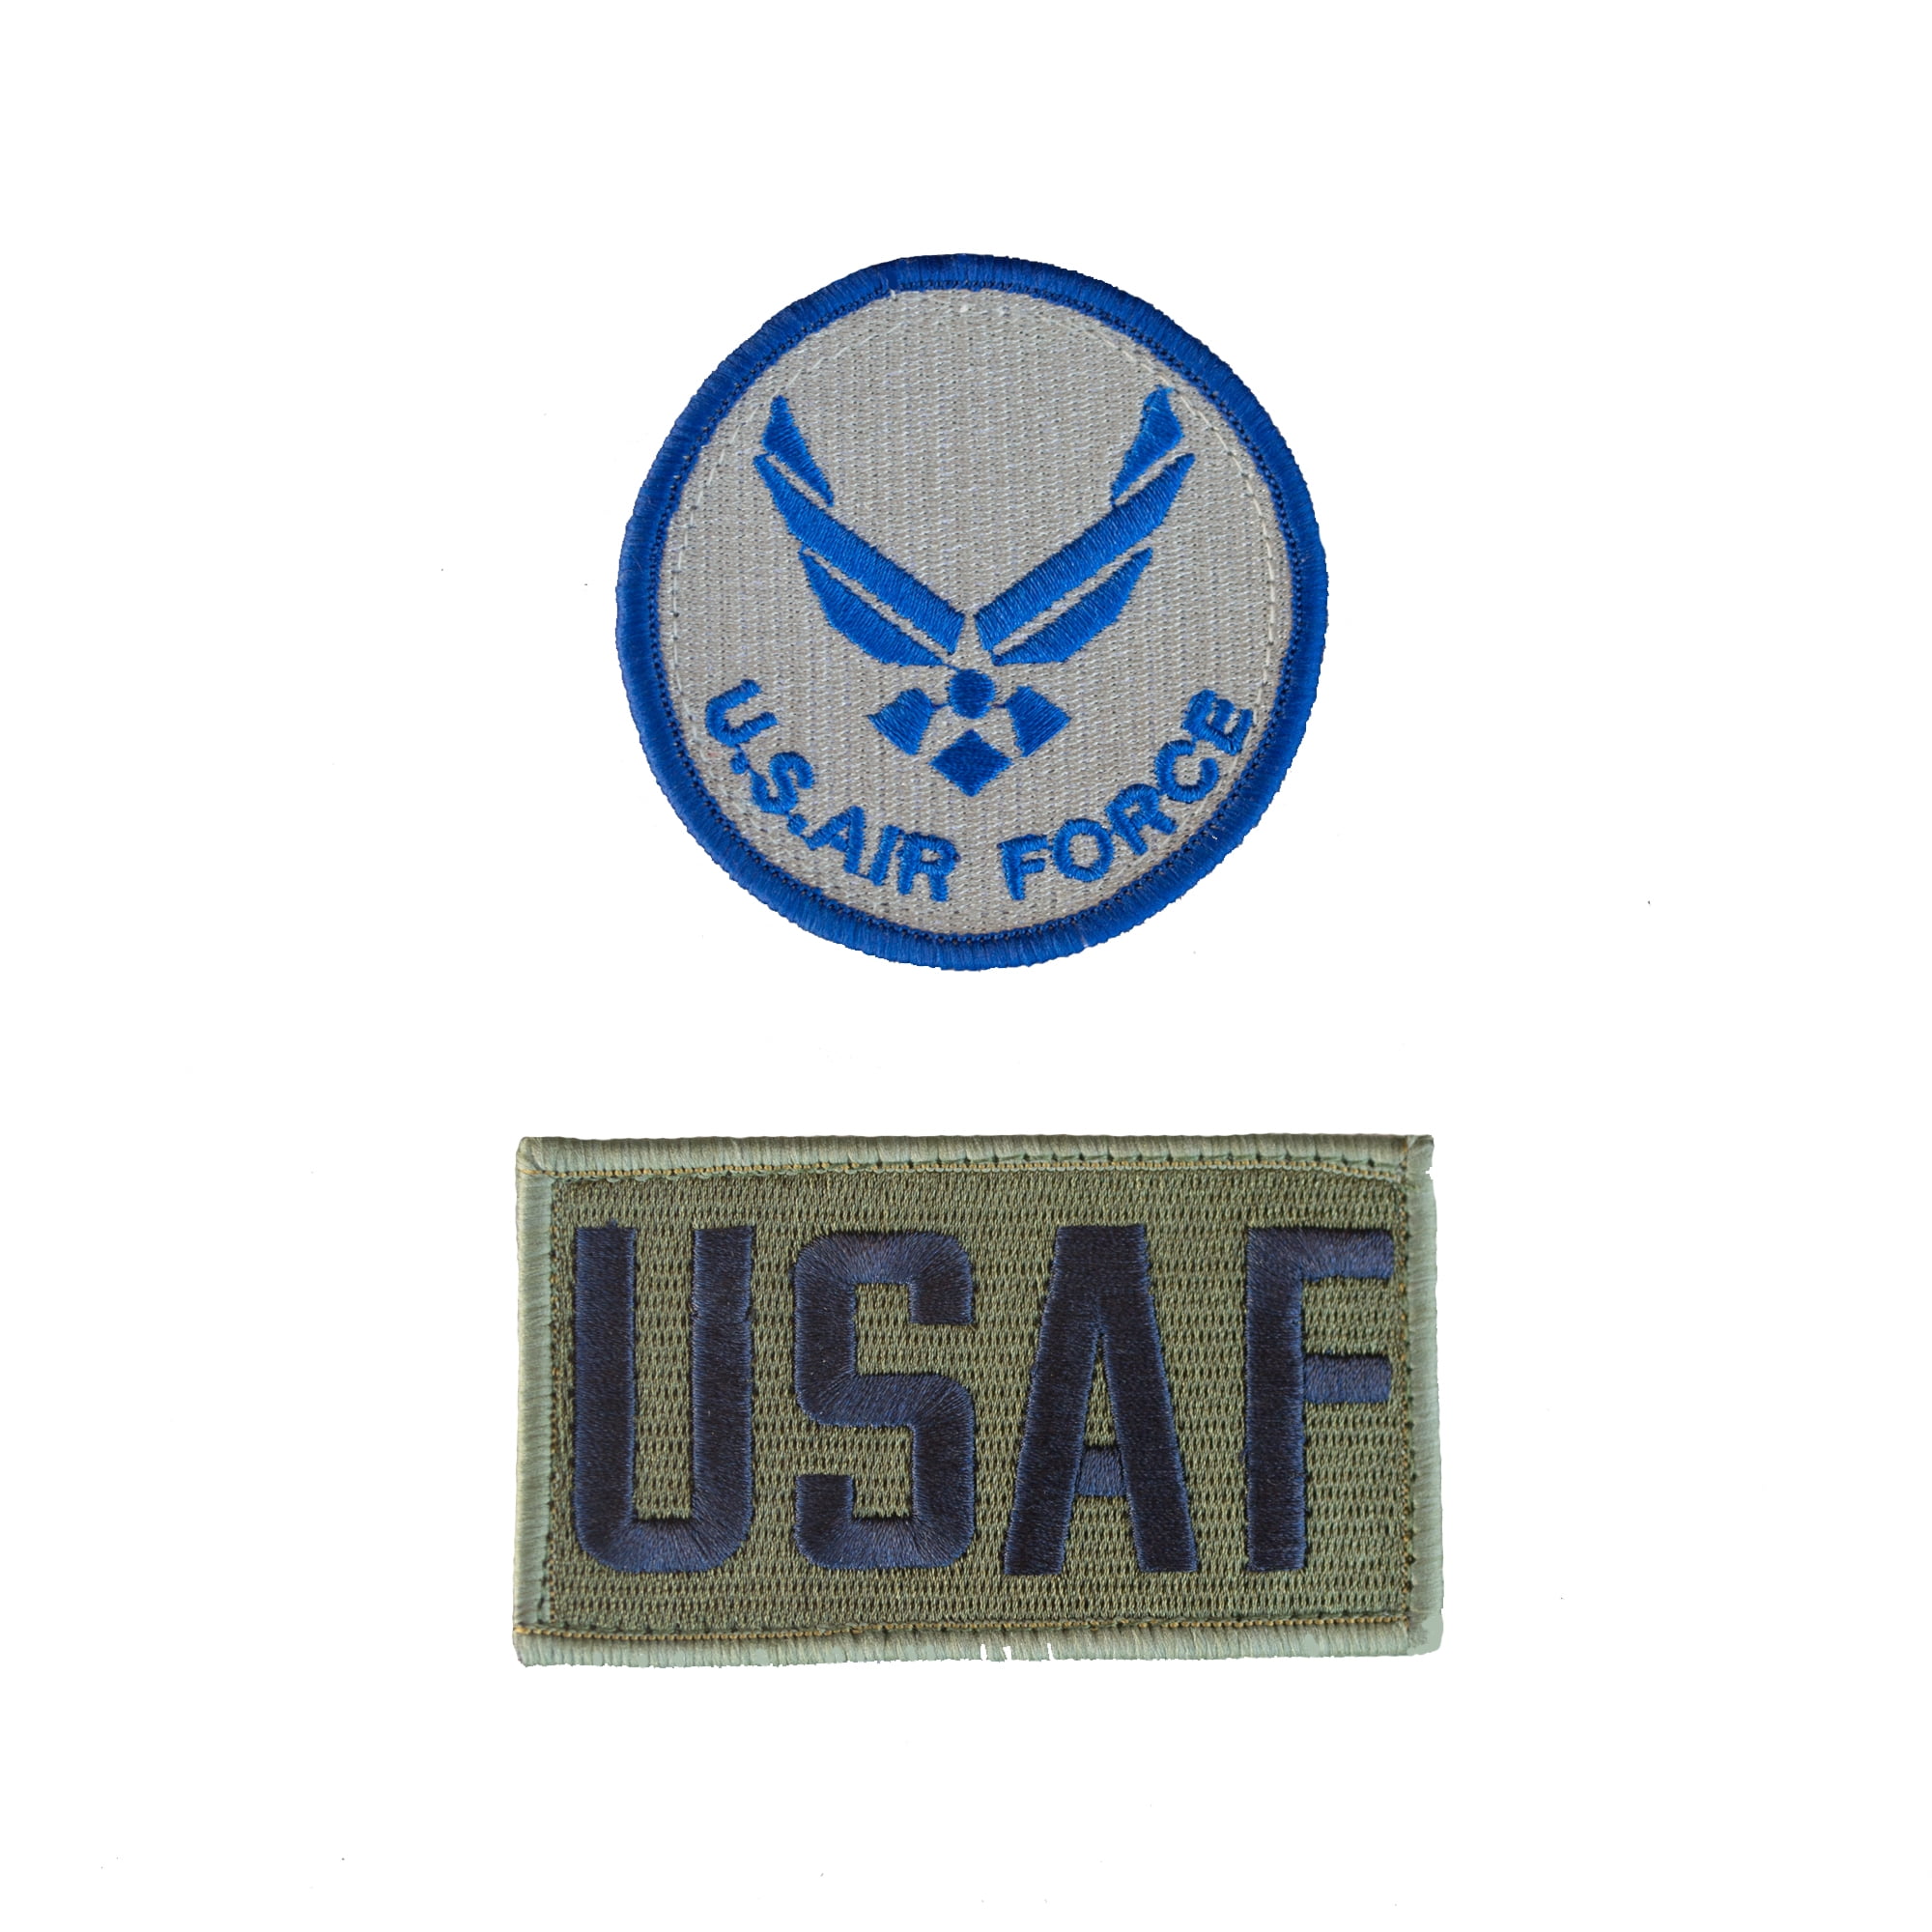 US AIR FORCE WING II HAT PATCH LOGO SEAL PIN UP OD GREEN UNIFORM FLIGHTSUIT VET 